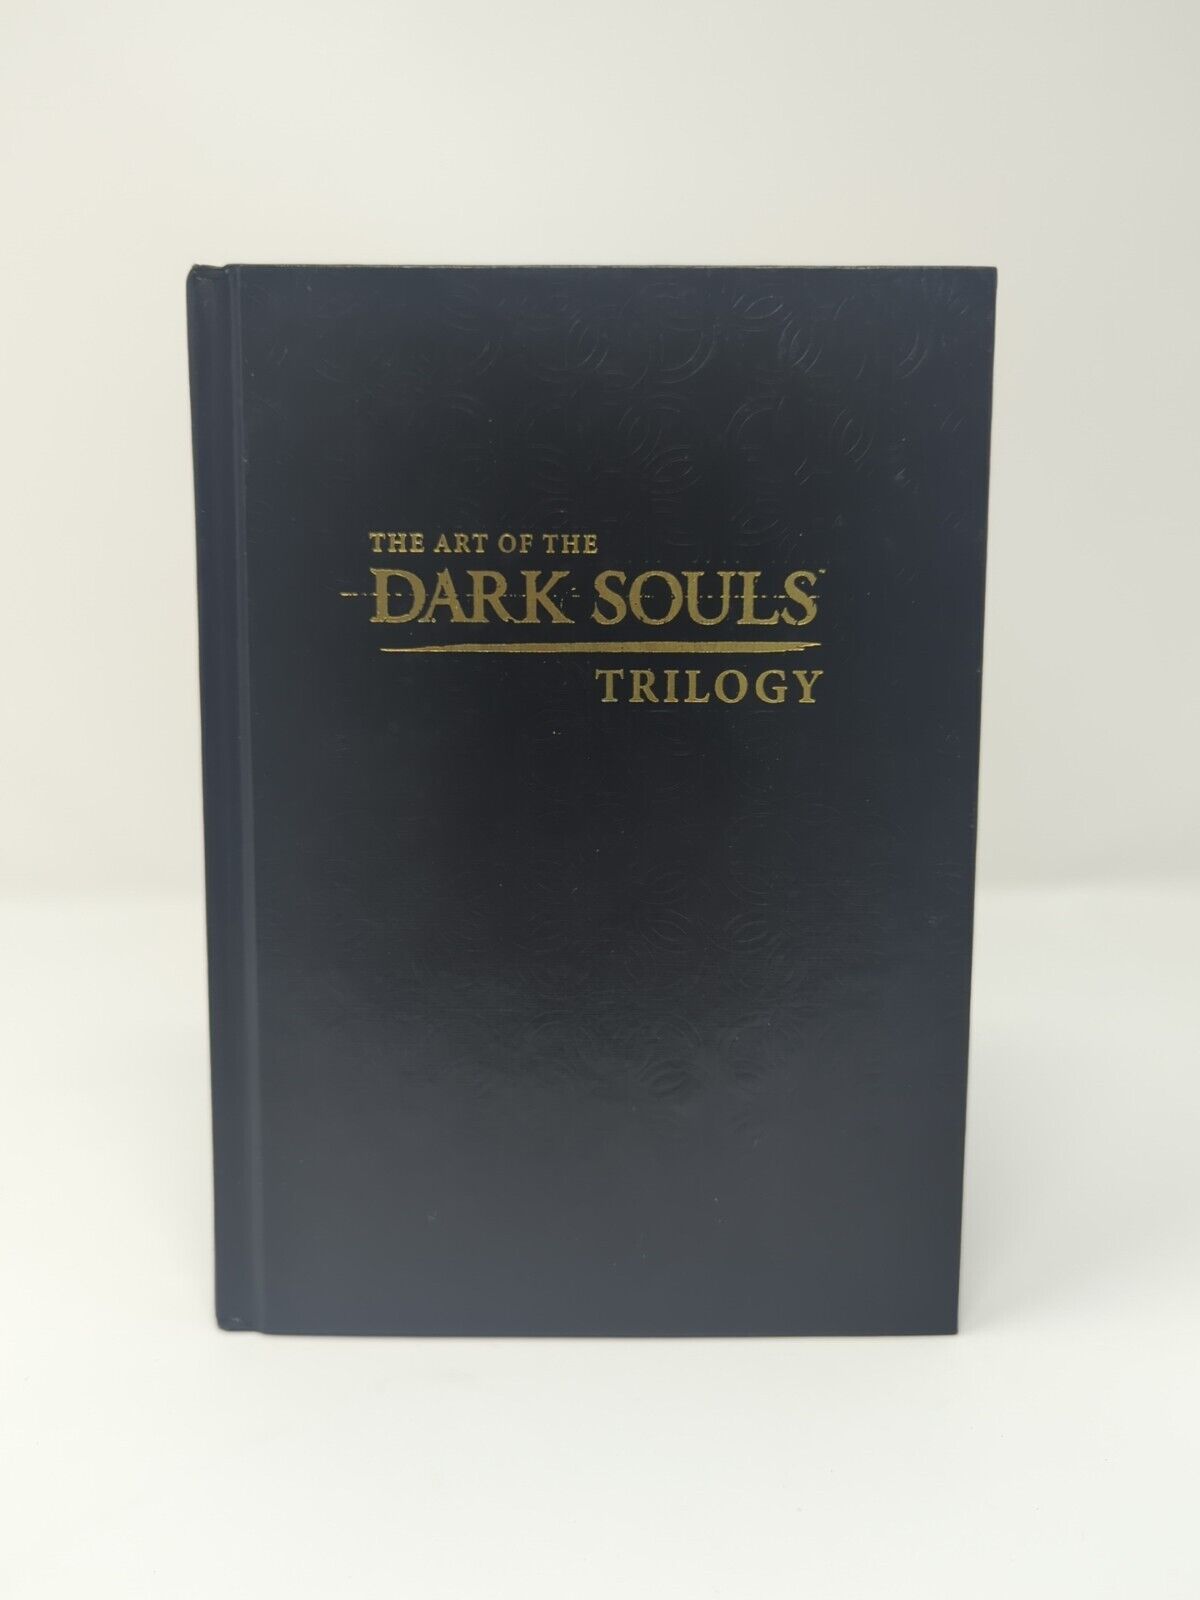 The Art of the Dark Souls Trilogy Hardcover Art Book (See Description)